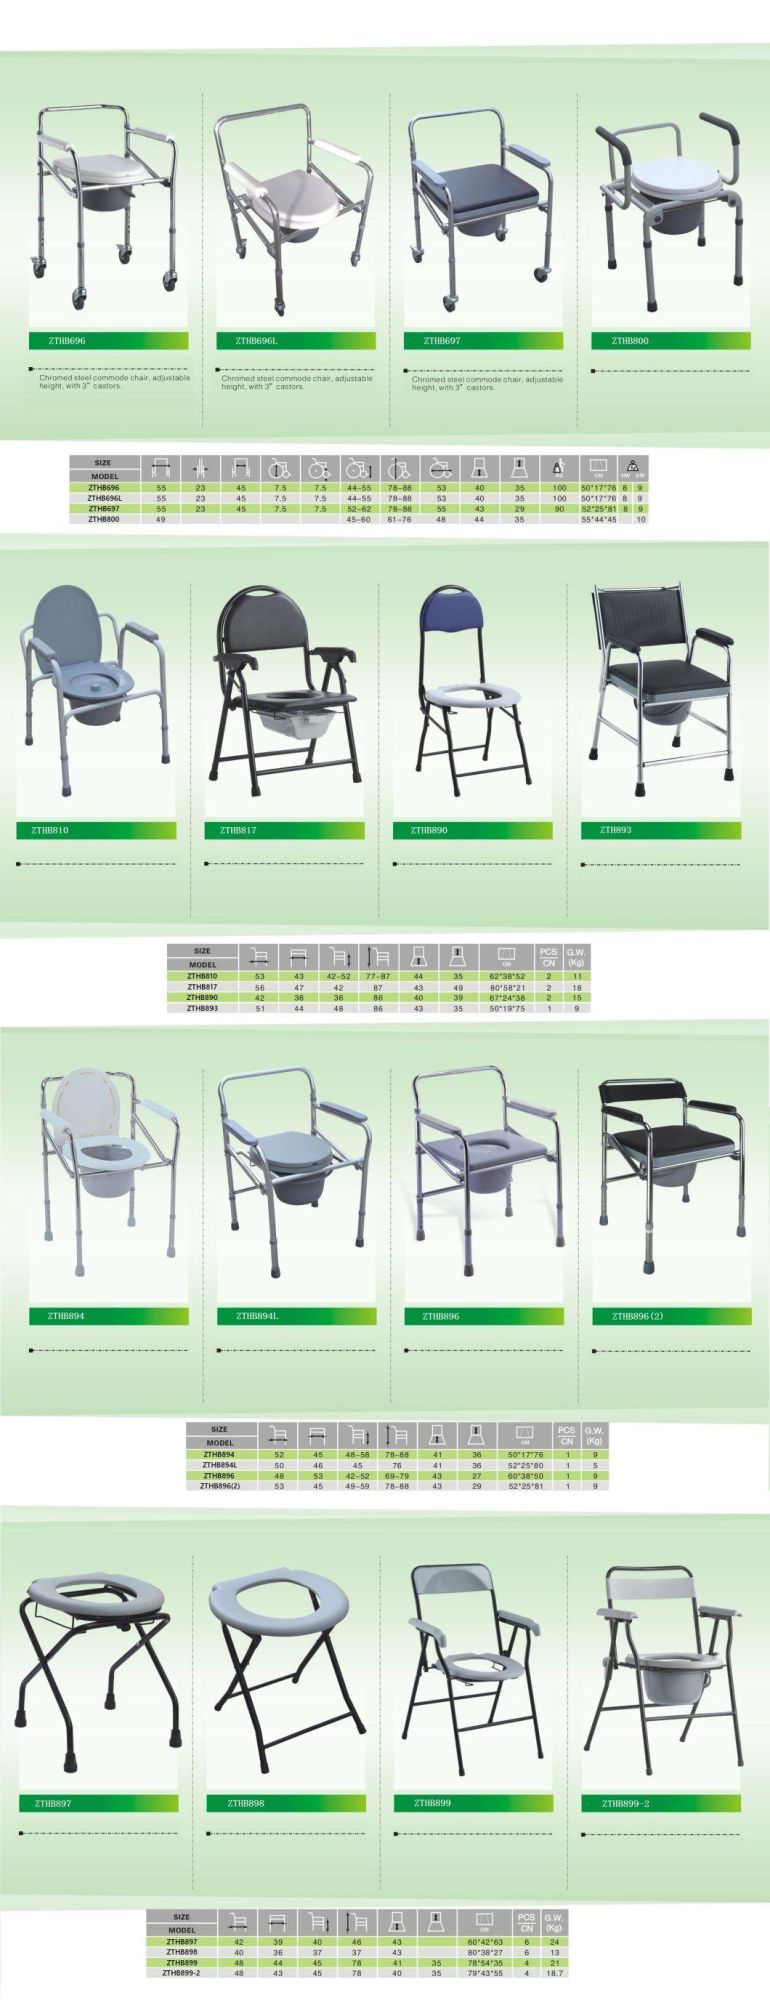 Antiskid Height Adjust Lightweight Commode Toilet Chair Elderly/Disable Patient People Rehabilitation Products Aluminum Nursing Safety Seat in Bathroom